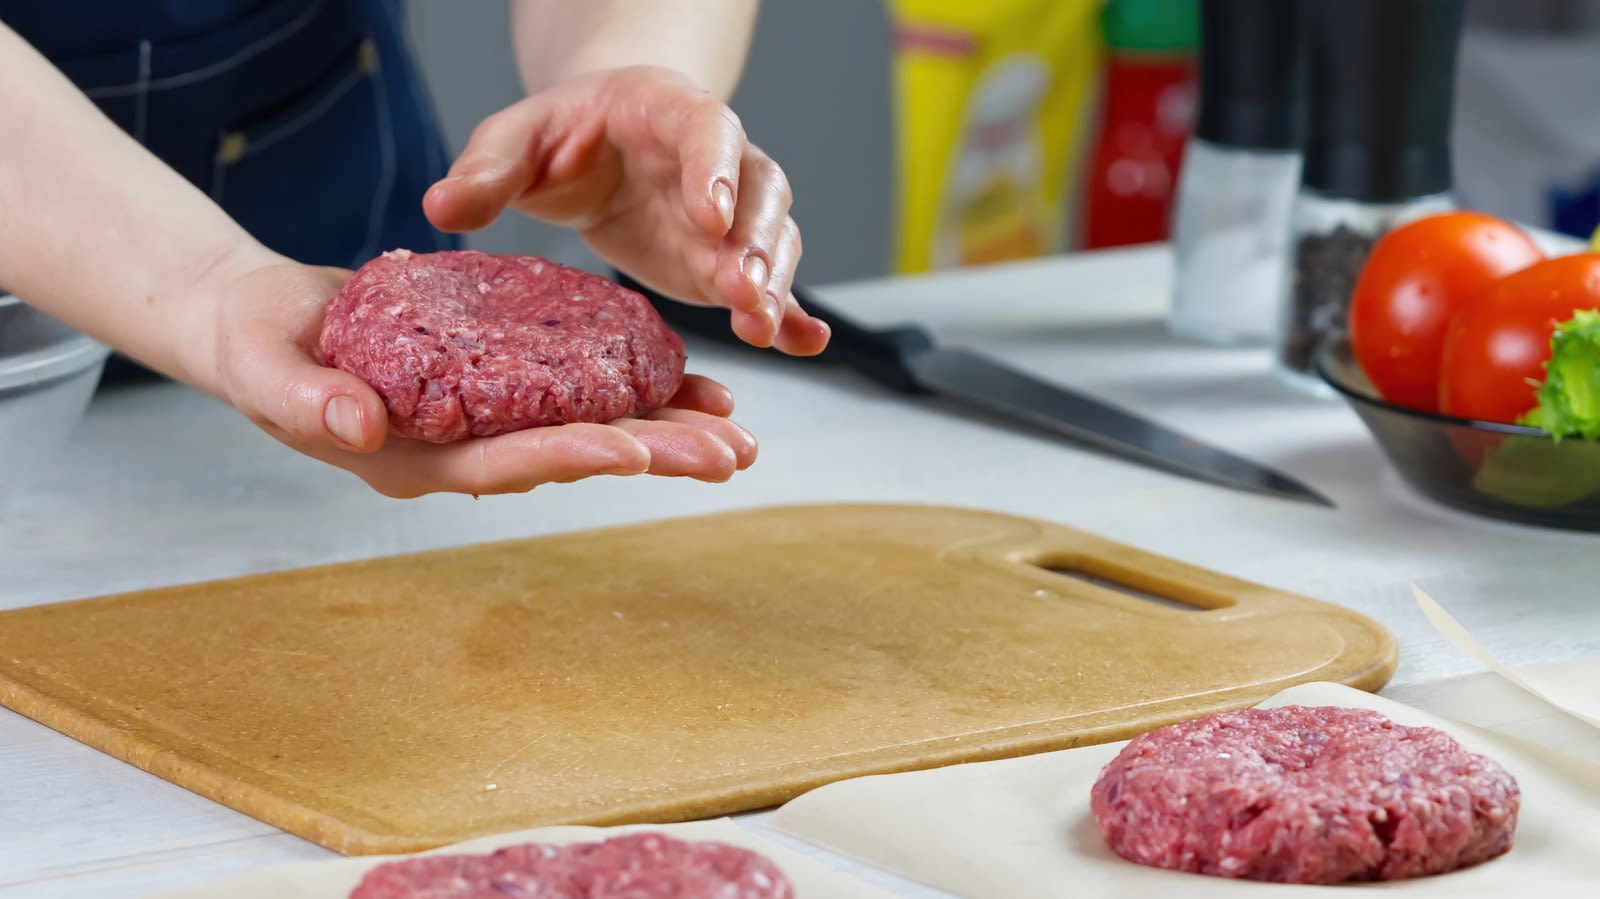 Is It Safe To Cook Beef Burgers In The Microwave?